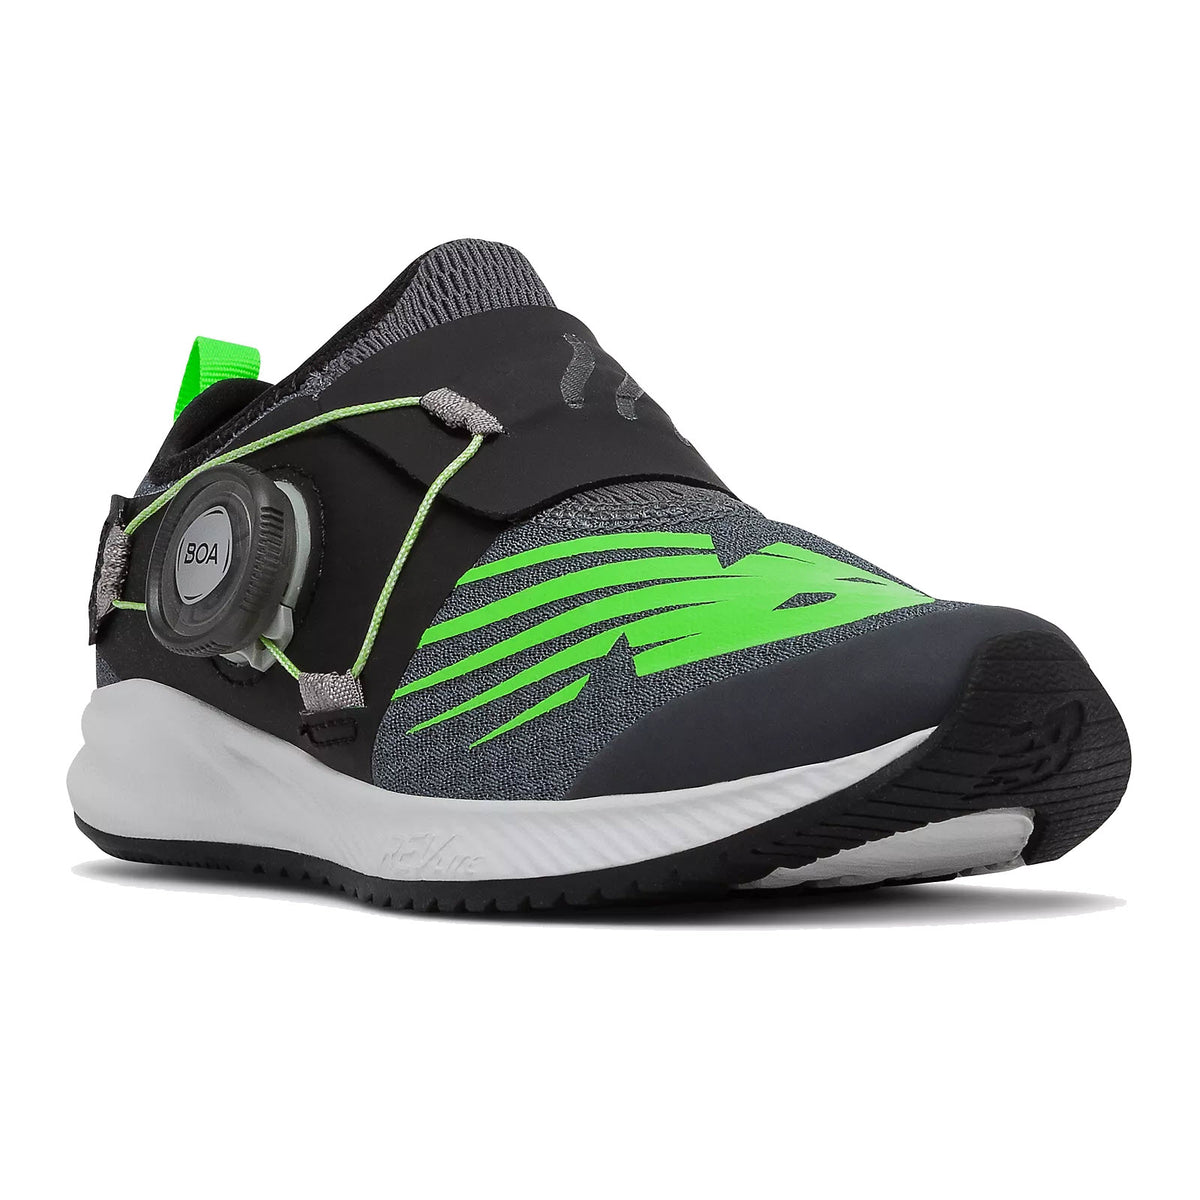 A black and green athletic shoe with a New Balance® FuelCore Reveal BOA Fit System.